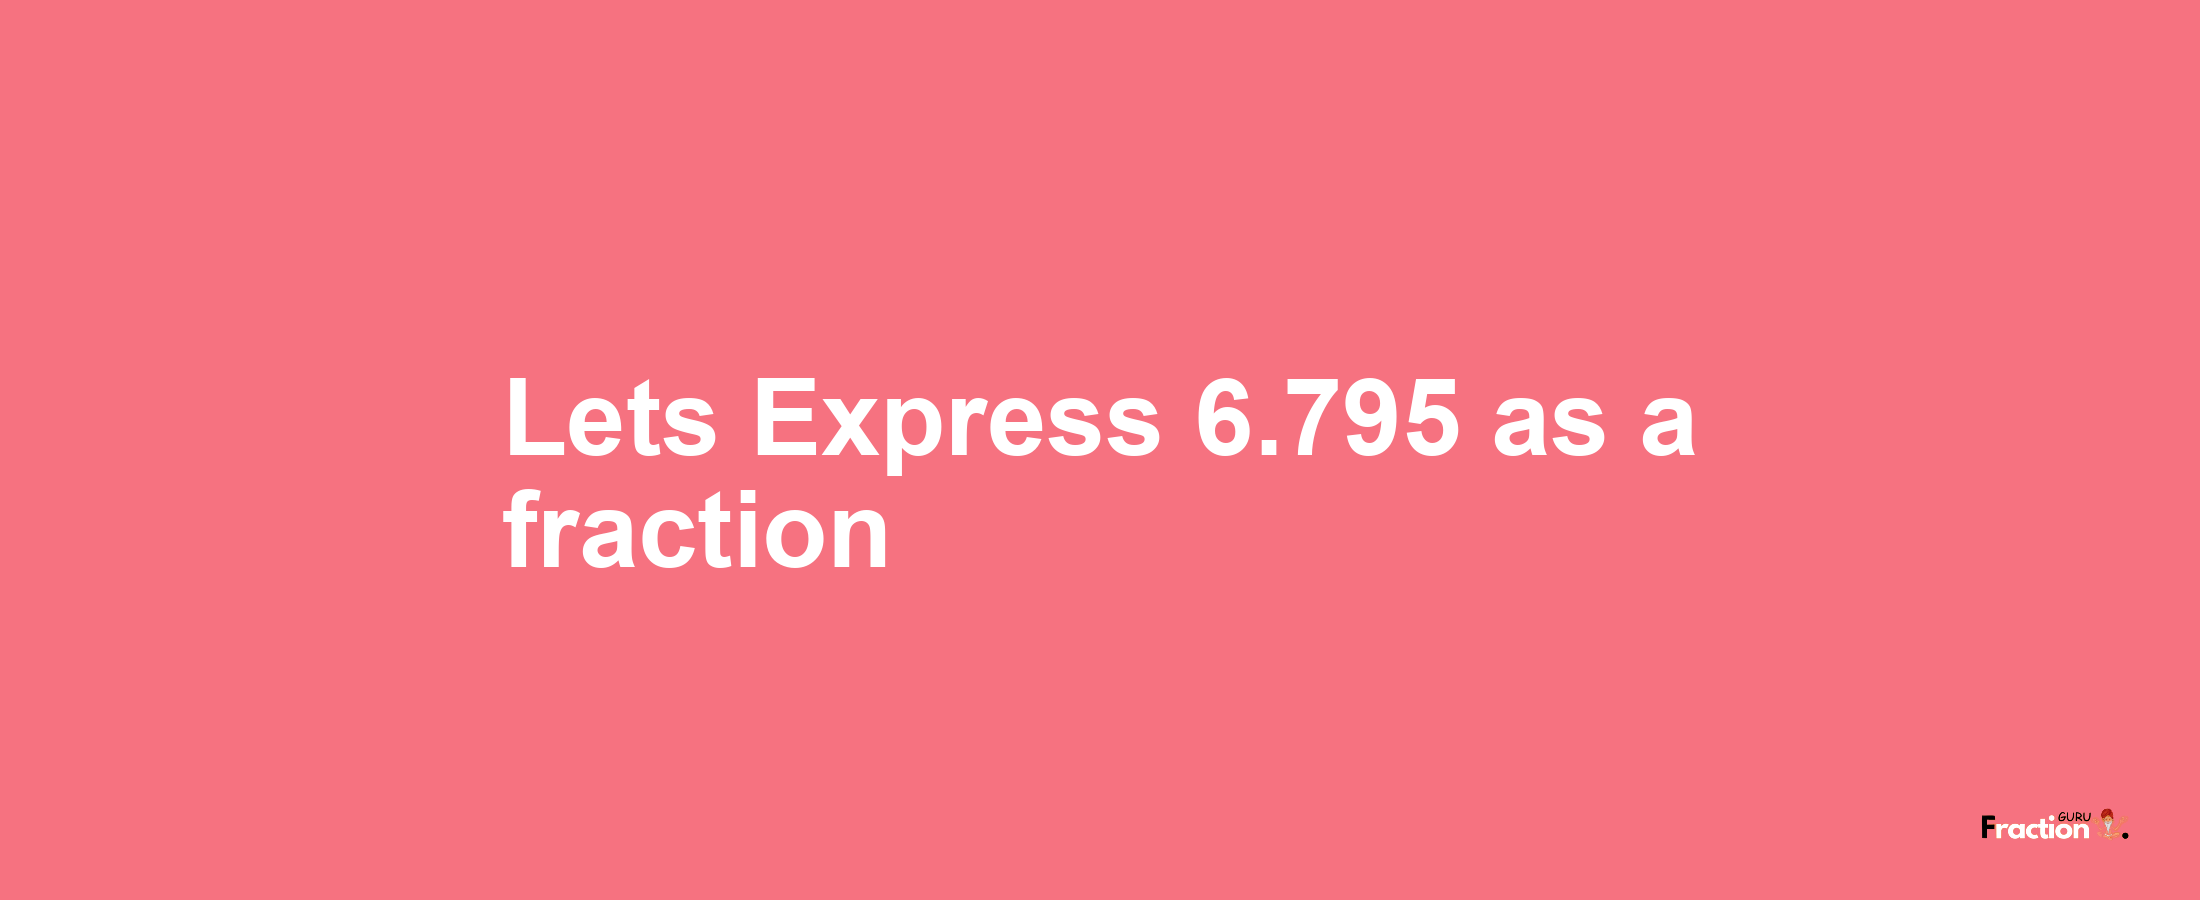 Lets Express 6.795 as afraction